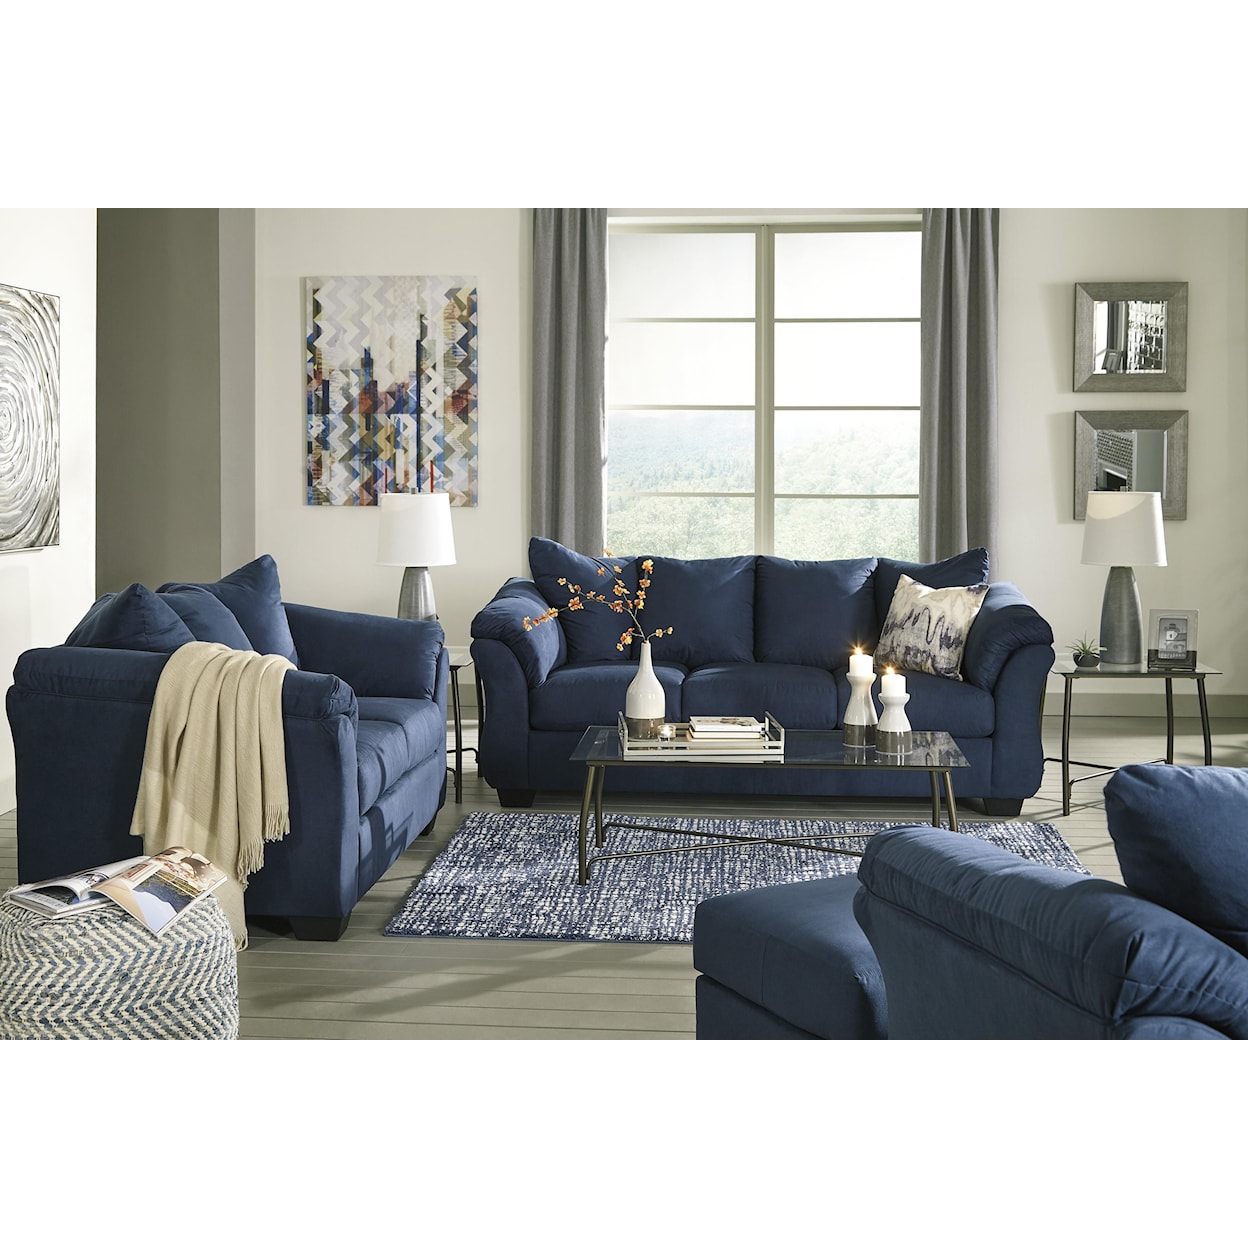 Signature Design by Ashley Darcy Sofa, Loveseat and Chair Set